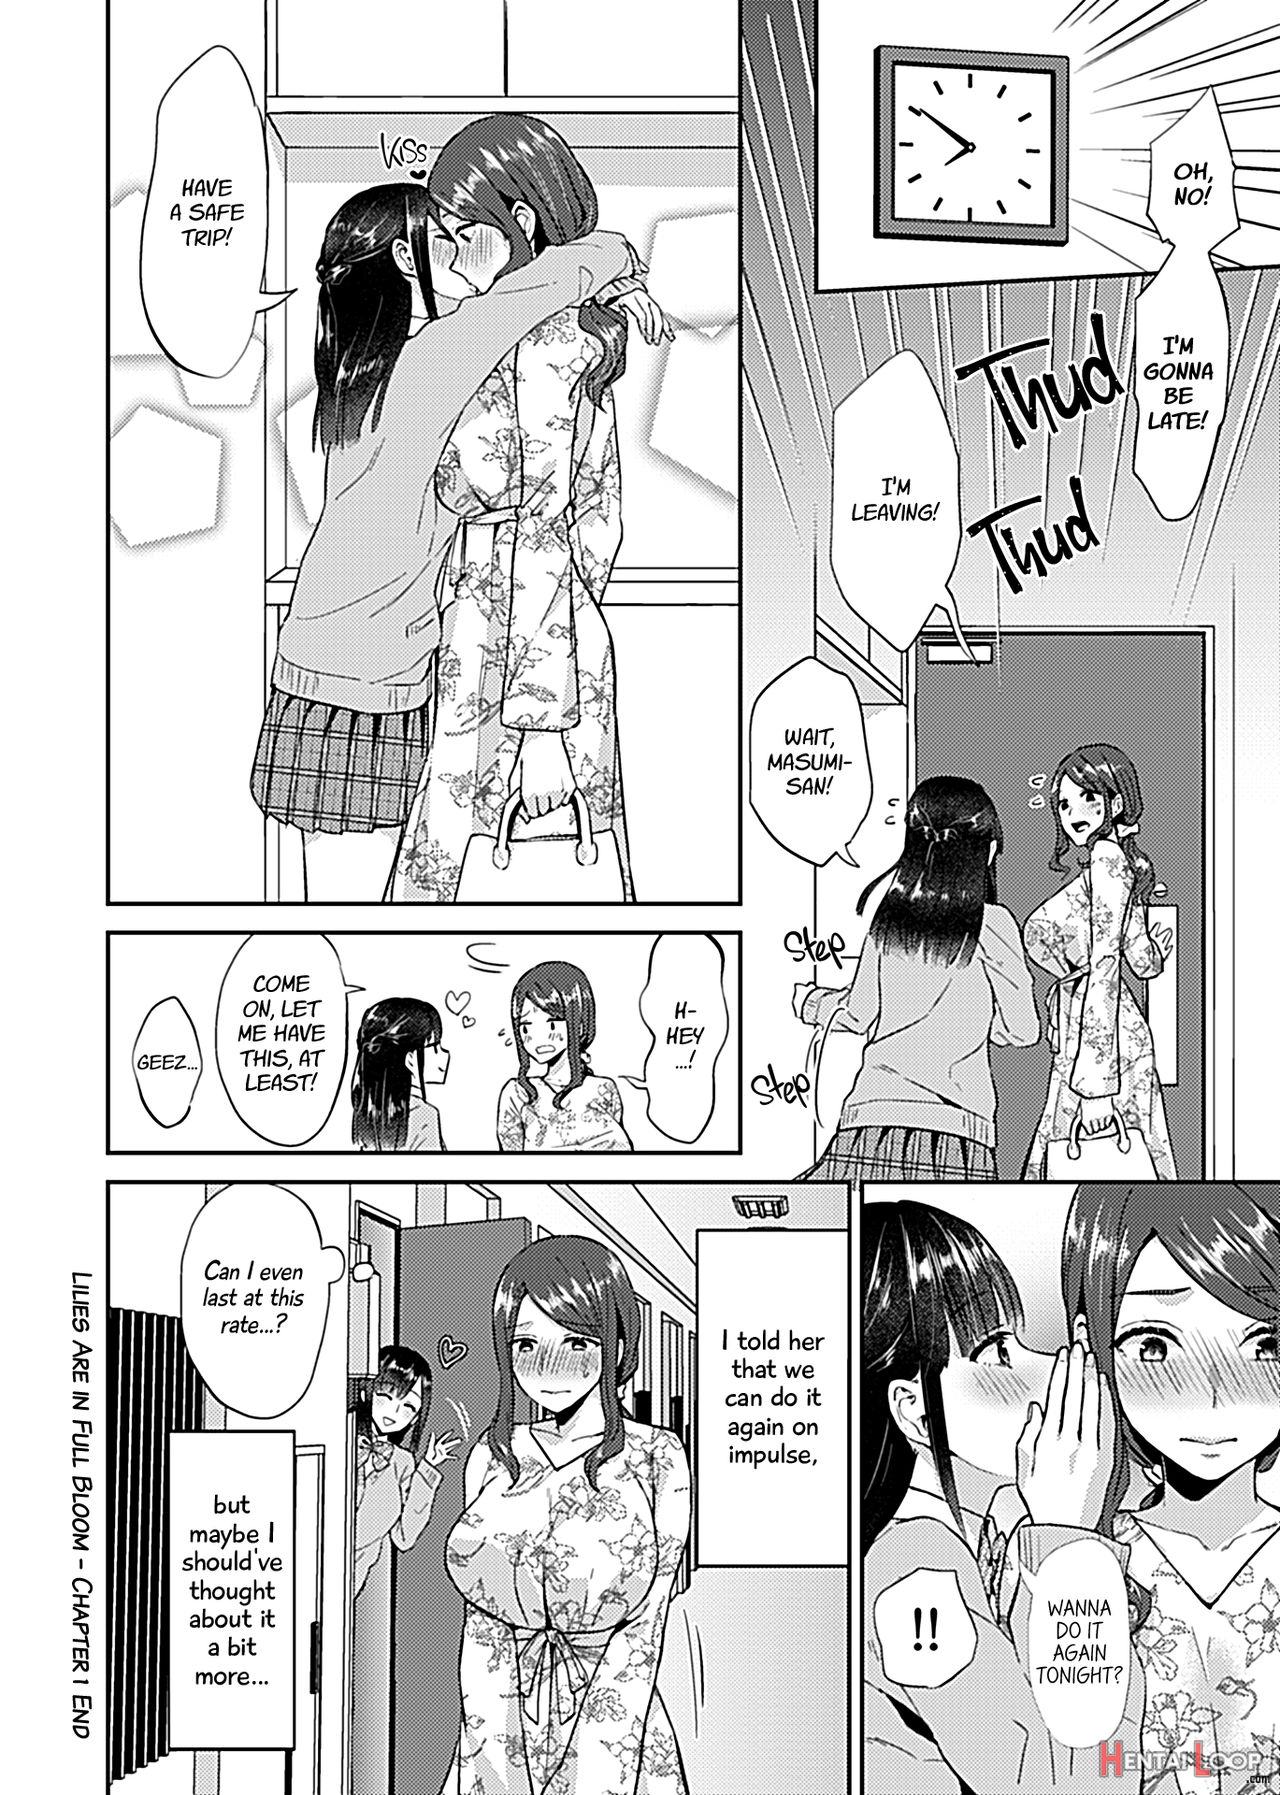 Lilies Are In Full Bloom - Volume 1 page 22